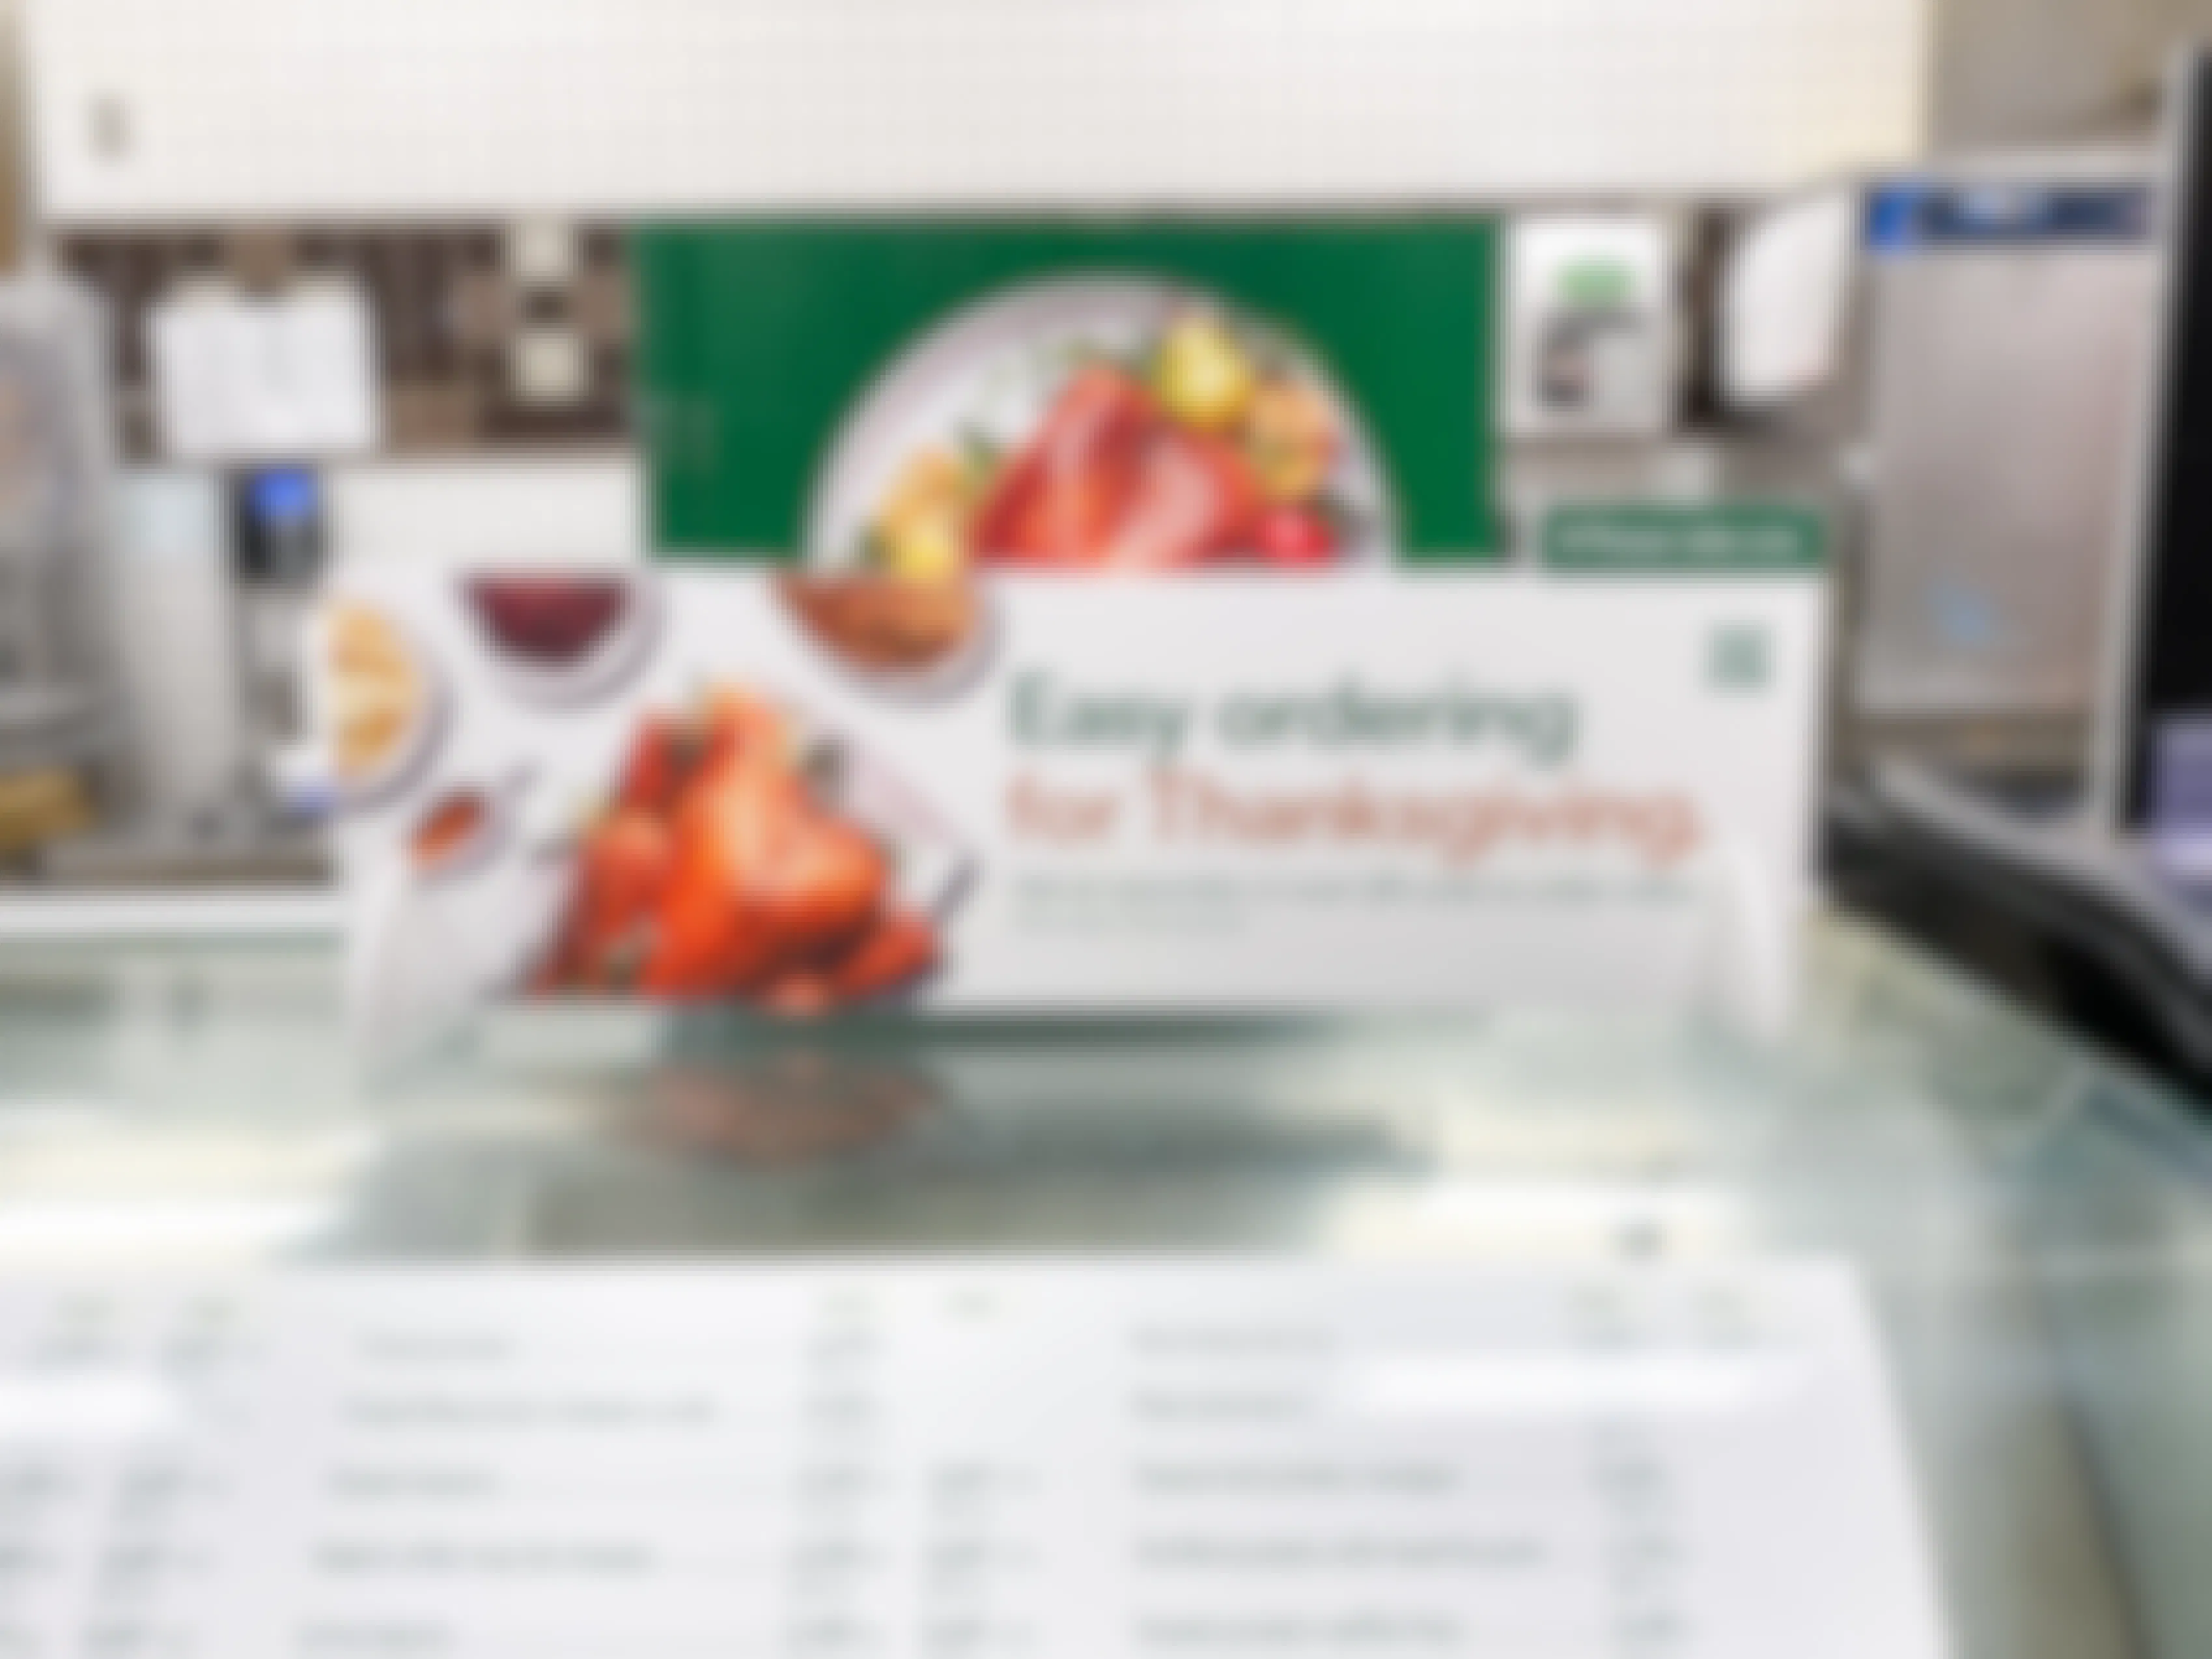 A sign in the Publix Deli that says, "Easy ordering for Thanksgiving" with some booklets to take.